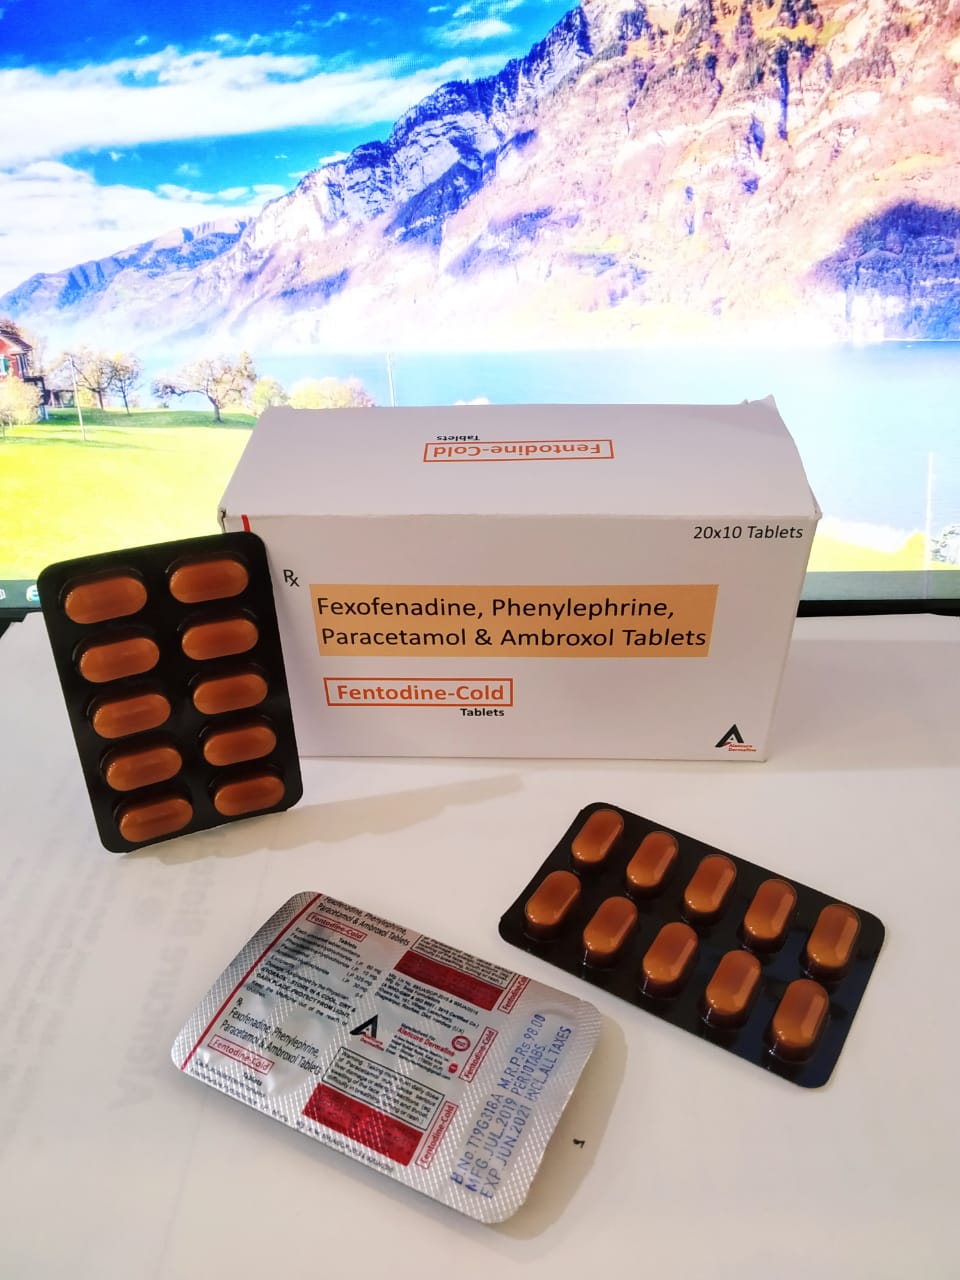 Product Name: FENTODINE COLD, Compositions of FENTODINE COLD are Fexofenadine, Phenylphrine, Paracetamol & Ambroxol Tablets - Alencure Biotech Pvt Ltd